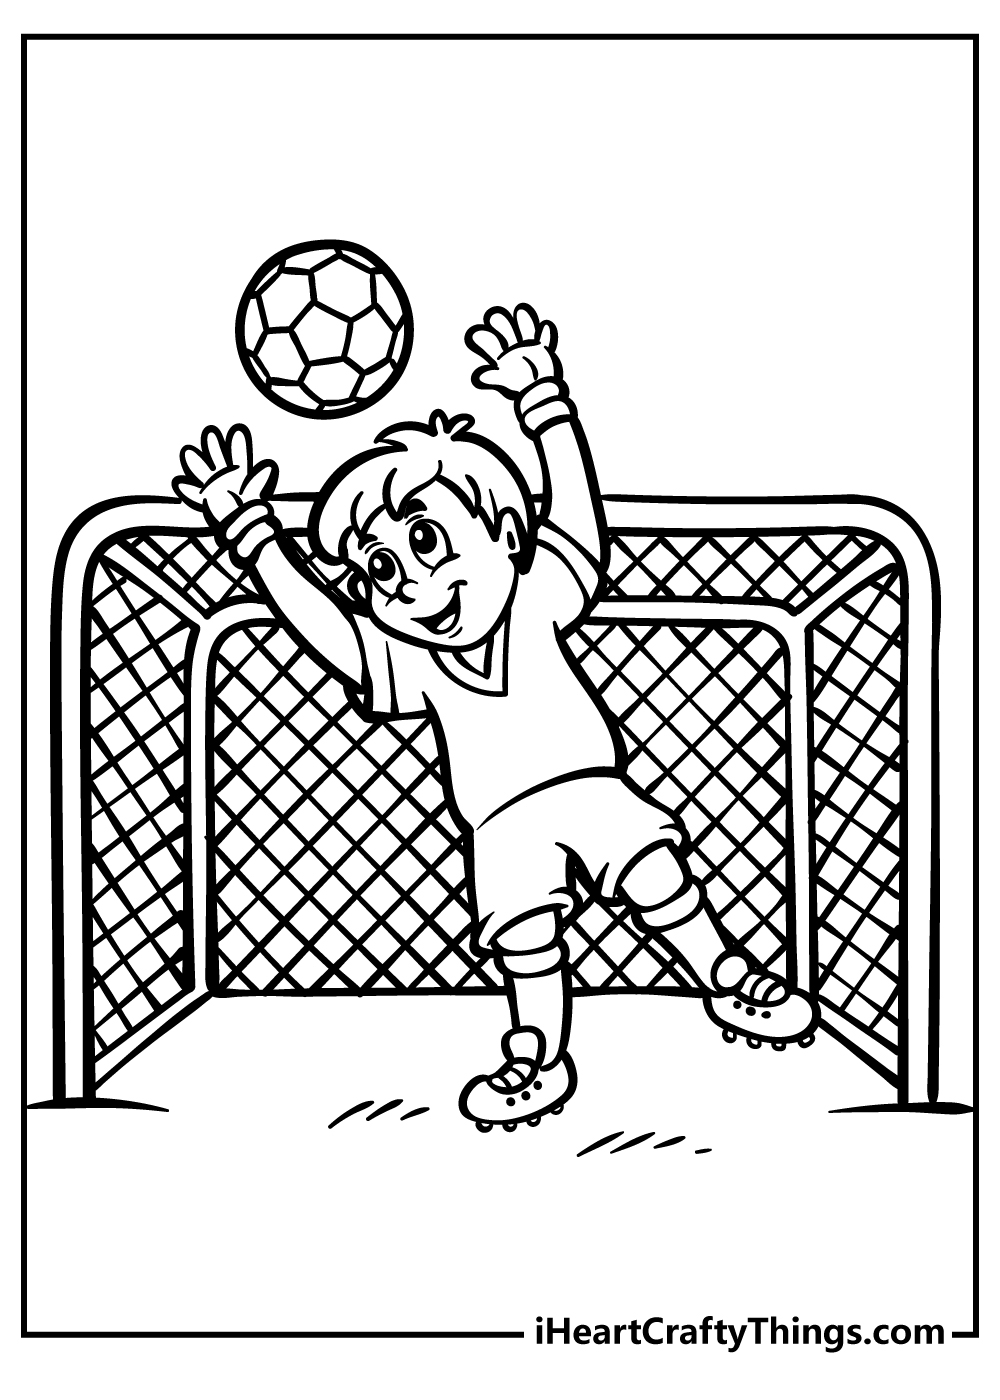 Football Coloring Pages for kids free download